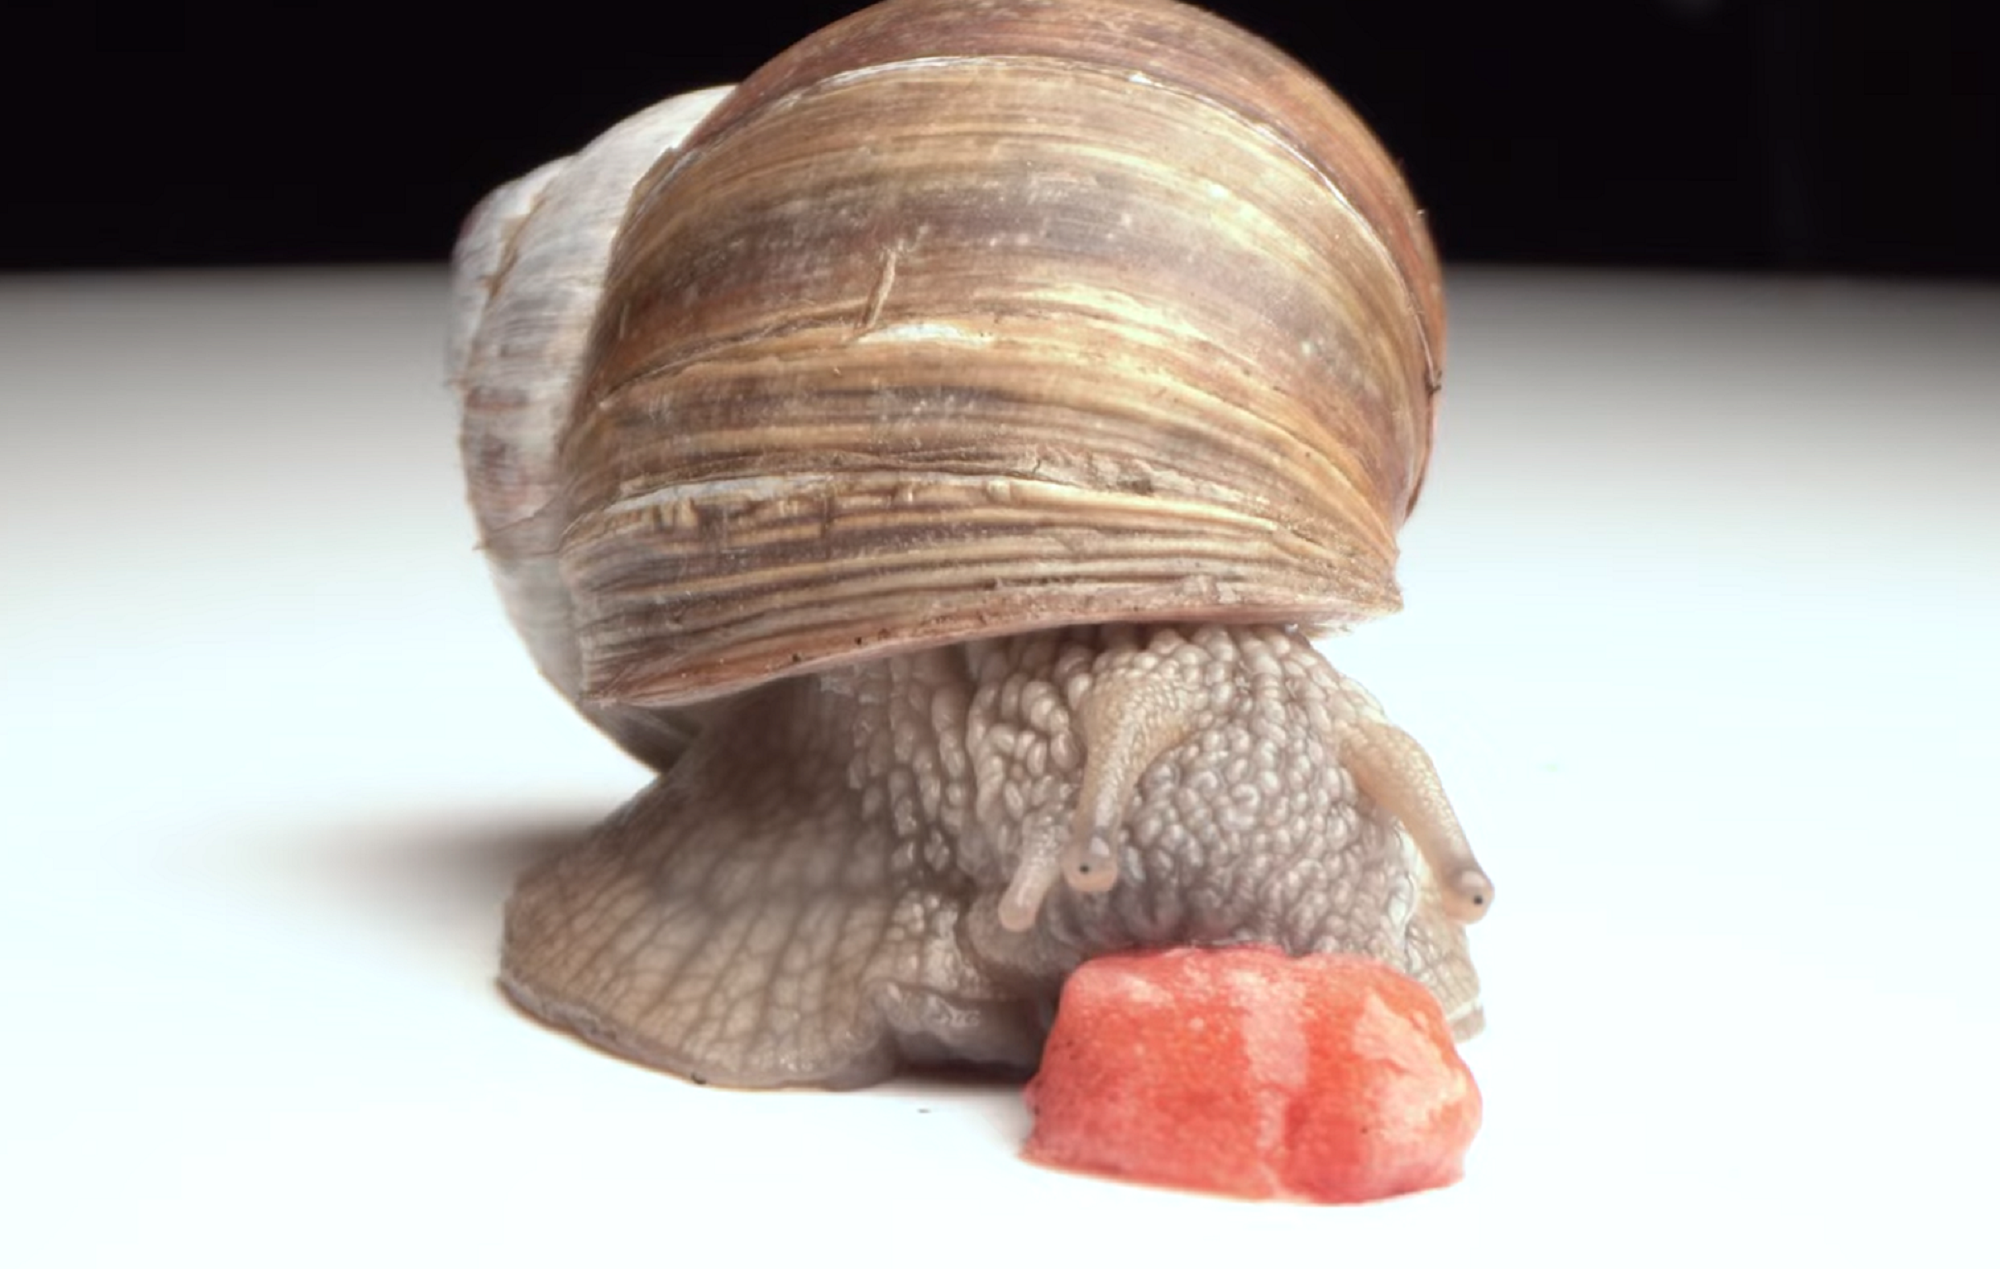 Experience the uncomfortable weirdness of a snail eating fruit